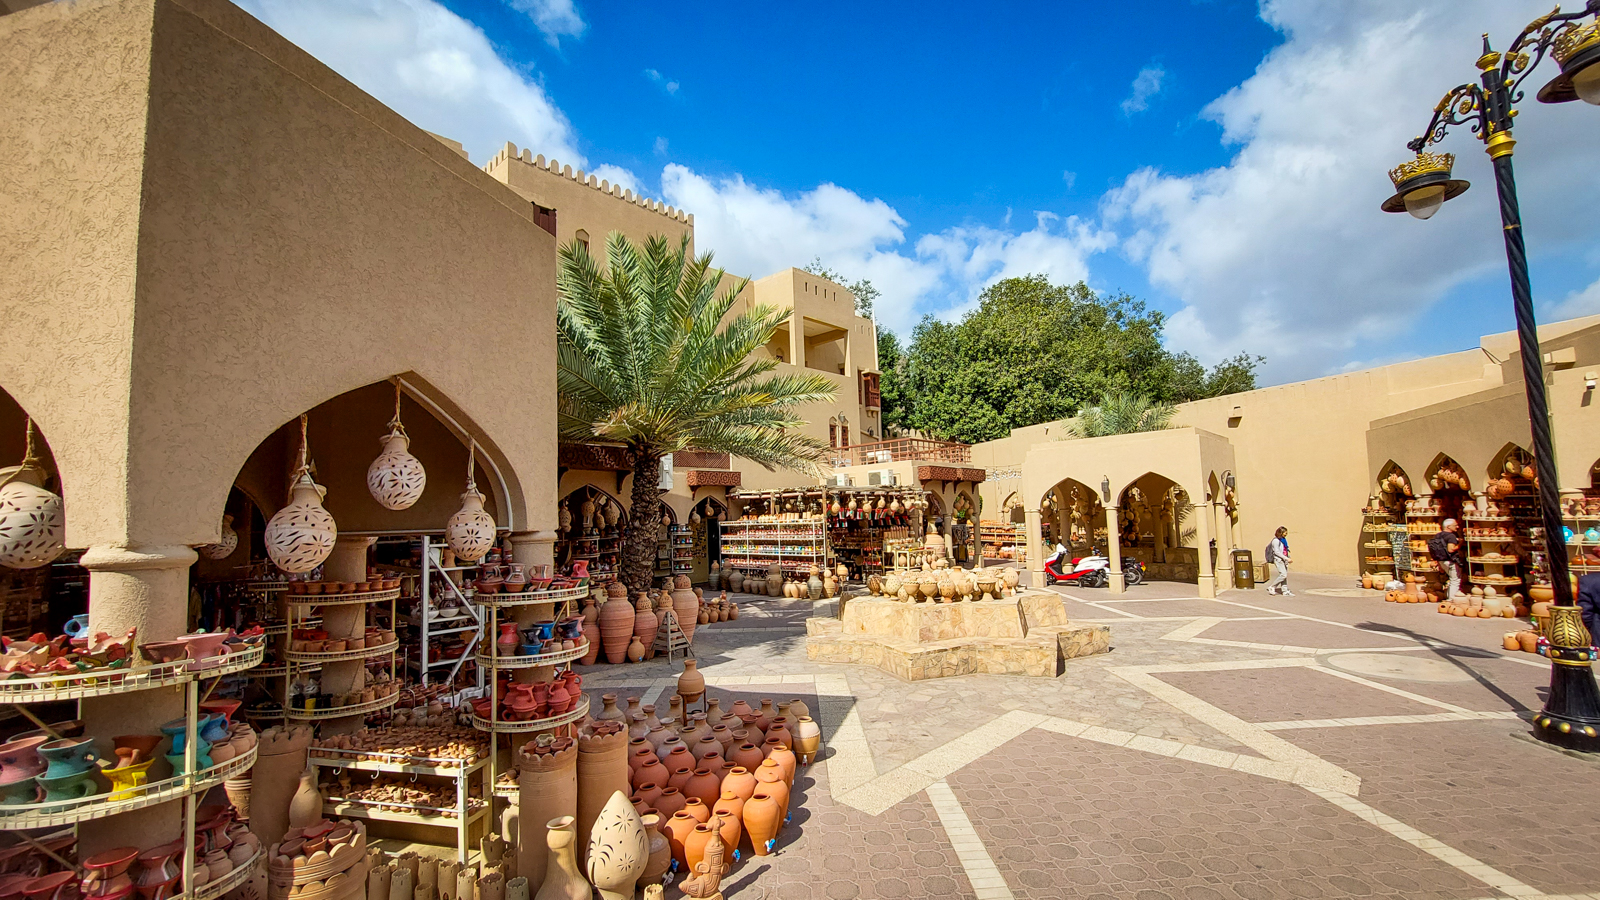 <span  class="uc_style_uc_tiles_grid_image_elementor_uc_items_attribute_title" style="color:#ffffff;">Beautiful little city 'Nizwa': well known for its cosy market (souk) area</span>